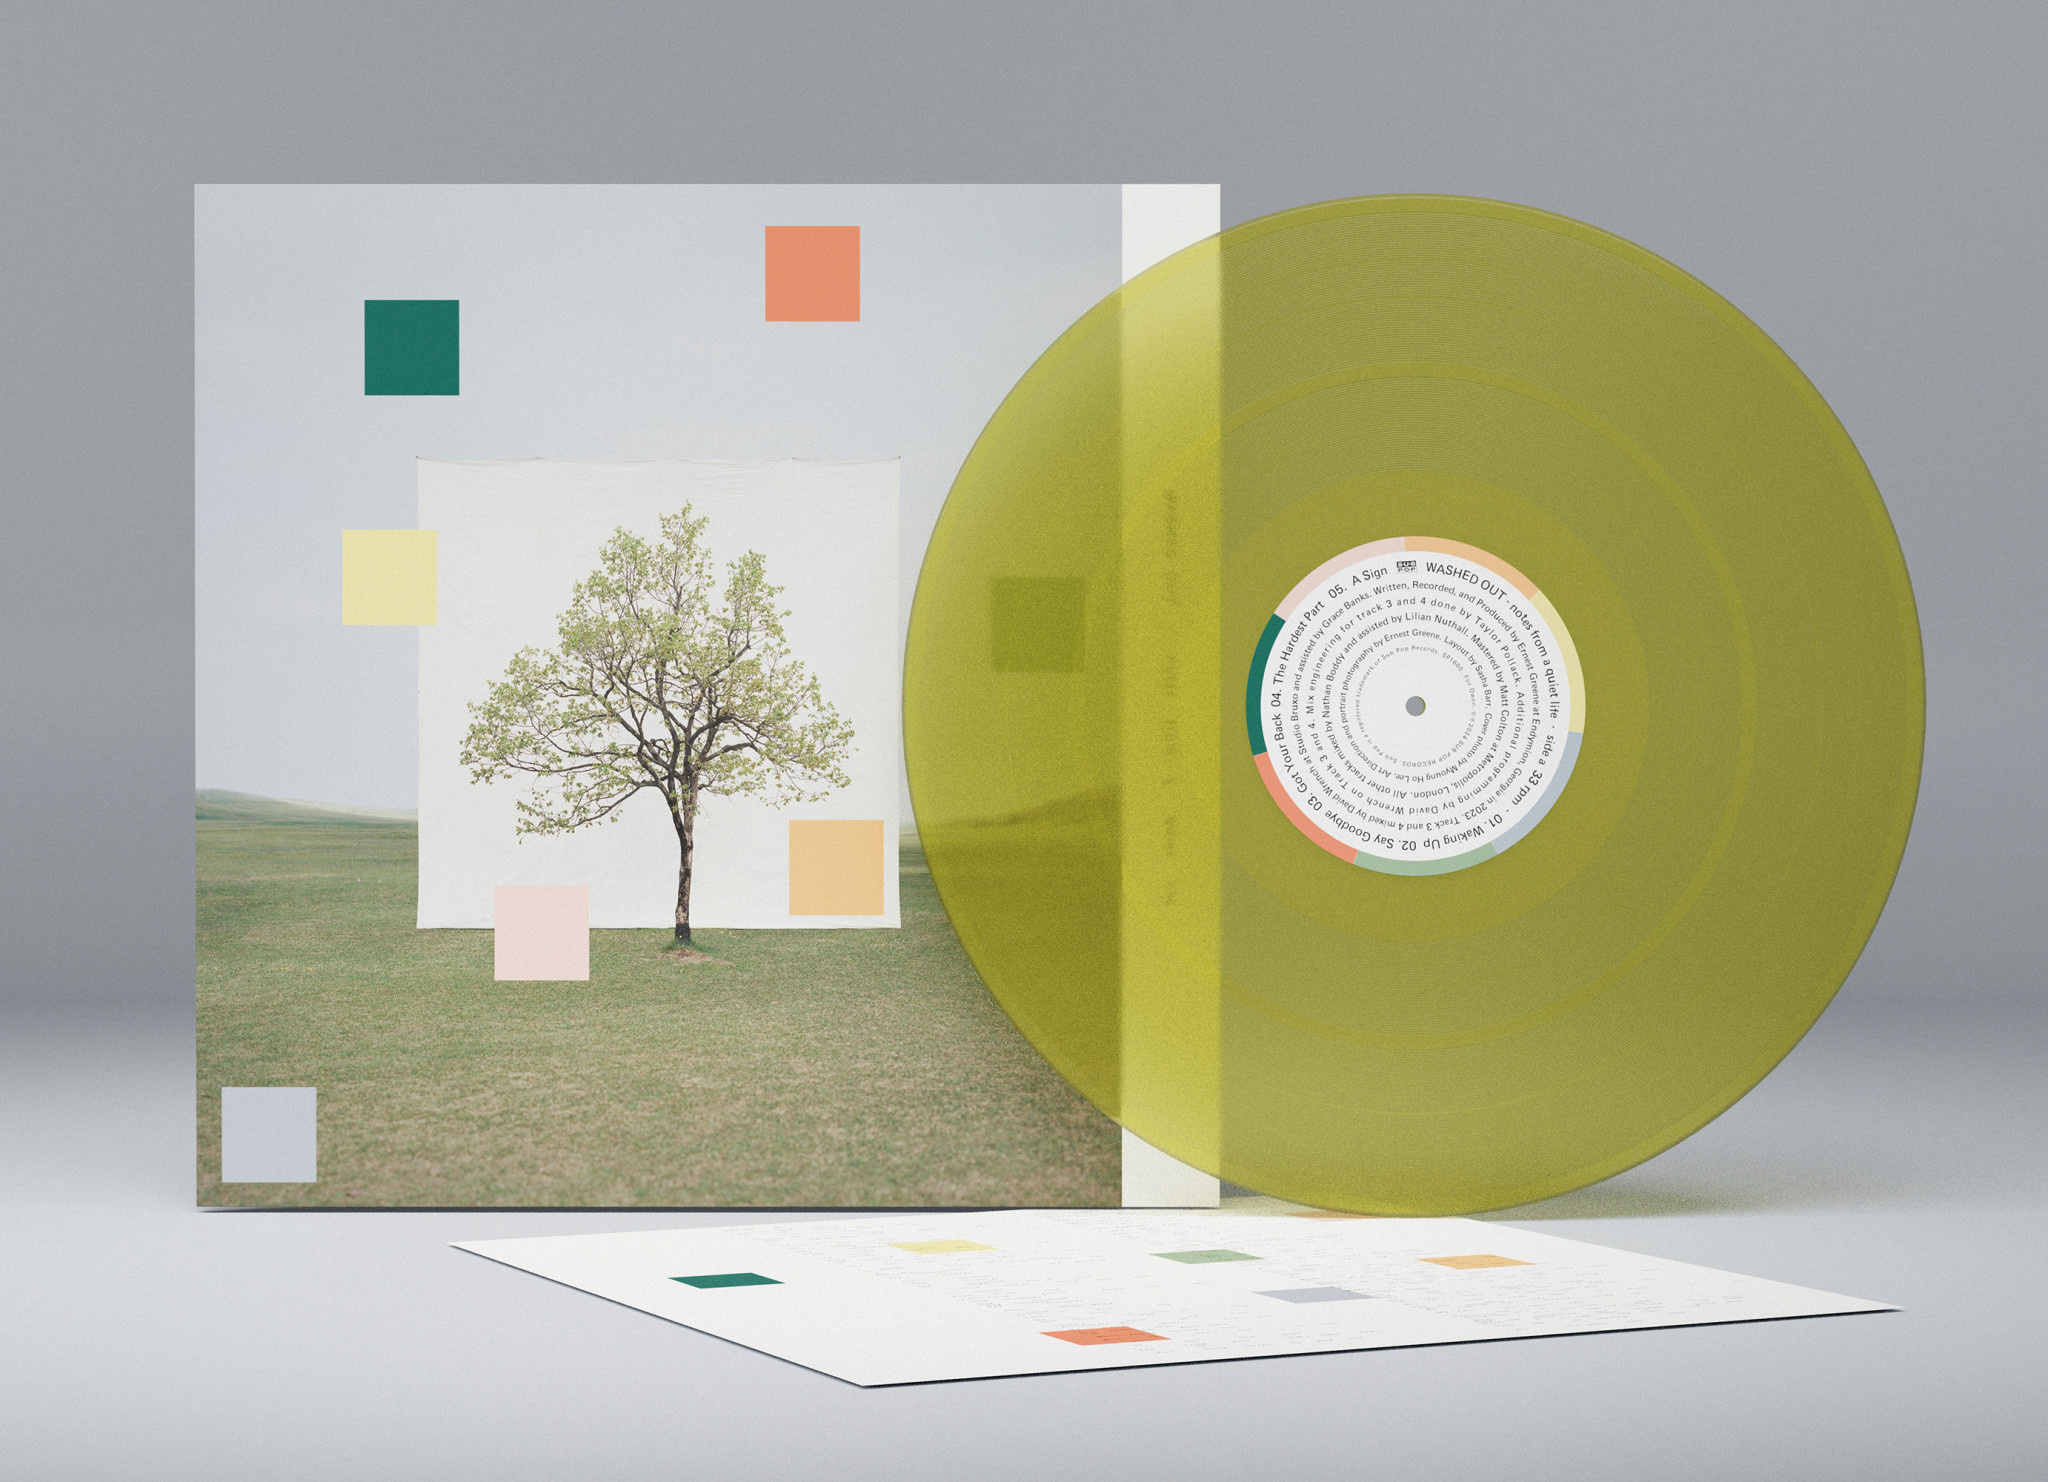 Sub Pop Records Washed Out - Notes from a Quiet Life (Yellowy  Green Vinyl)